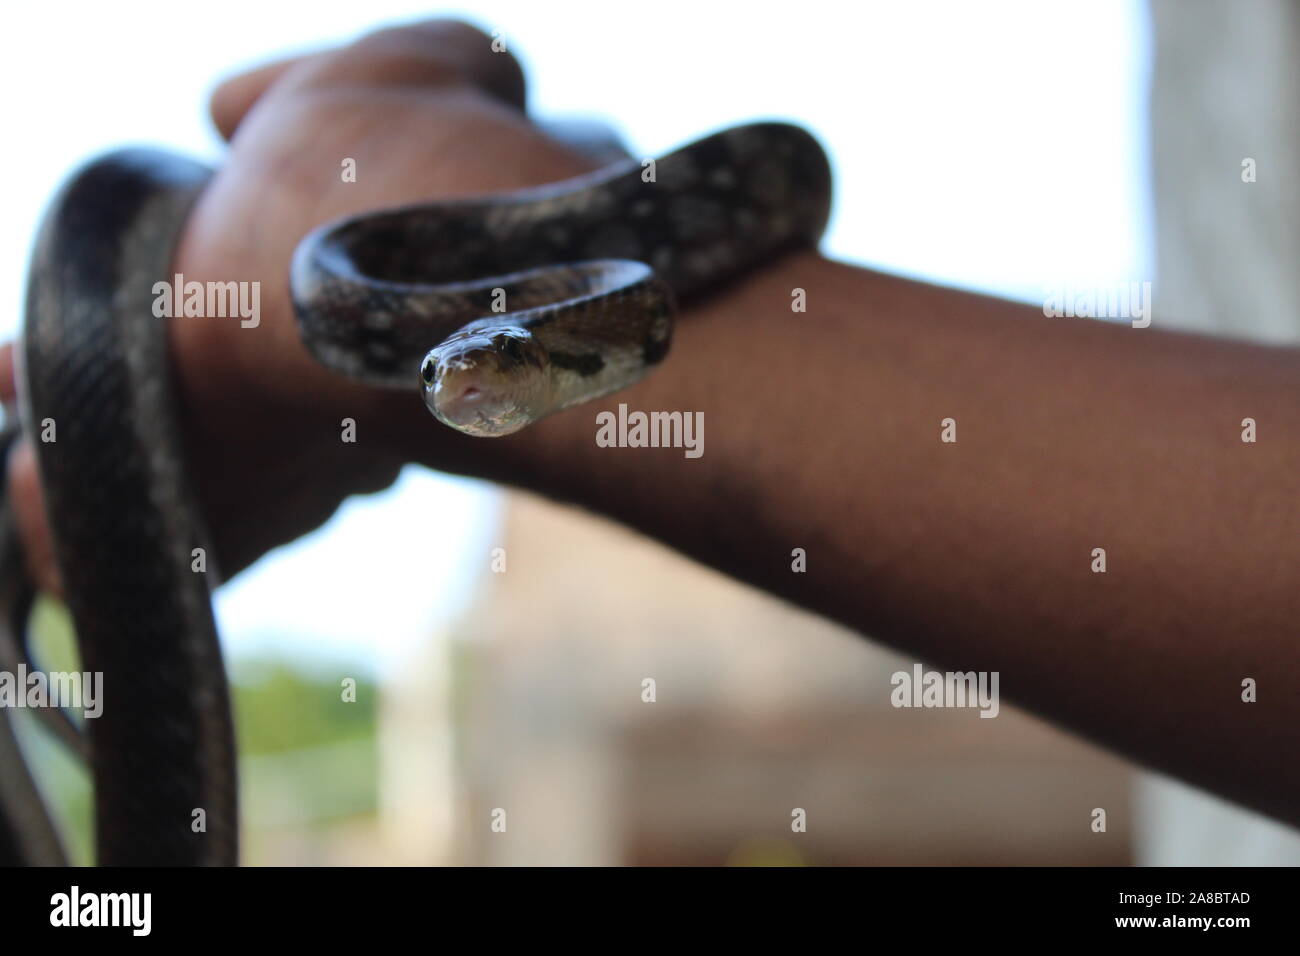 Black snake is in boy's hand. Stock Photo